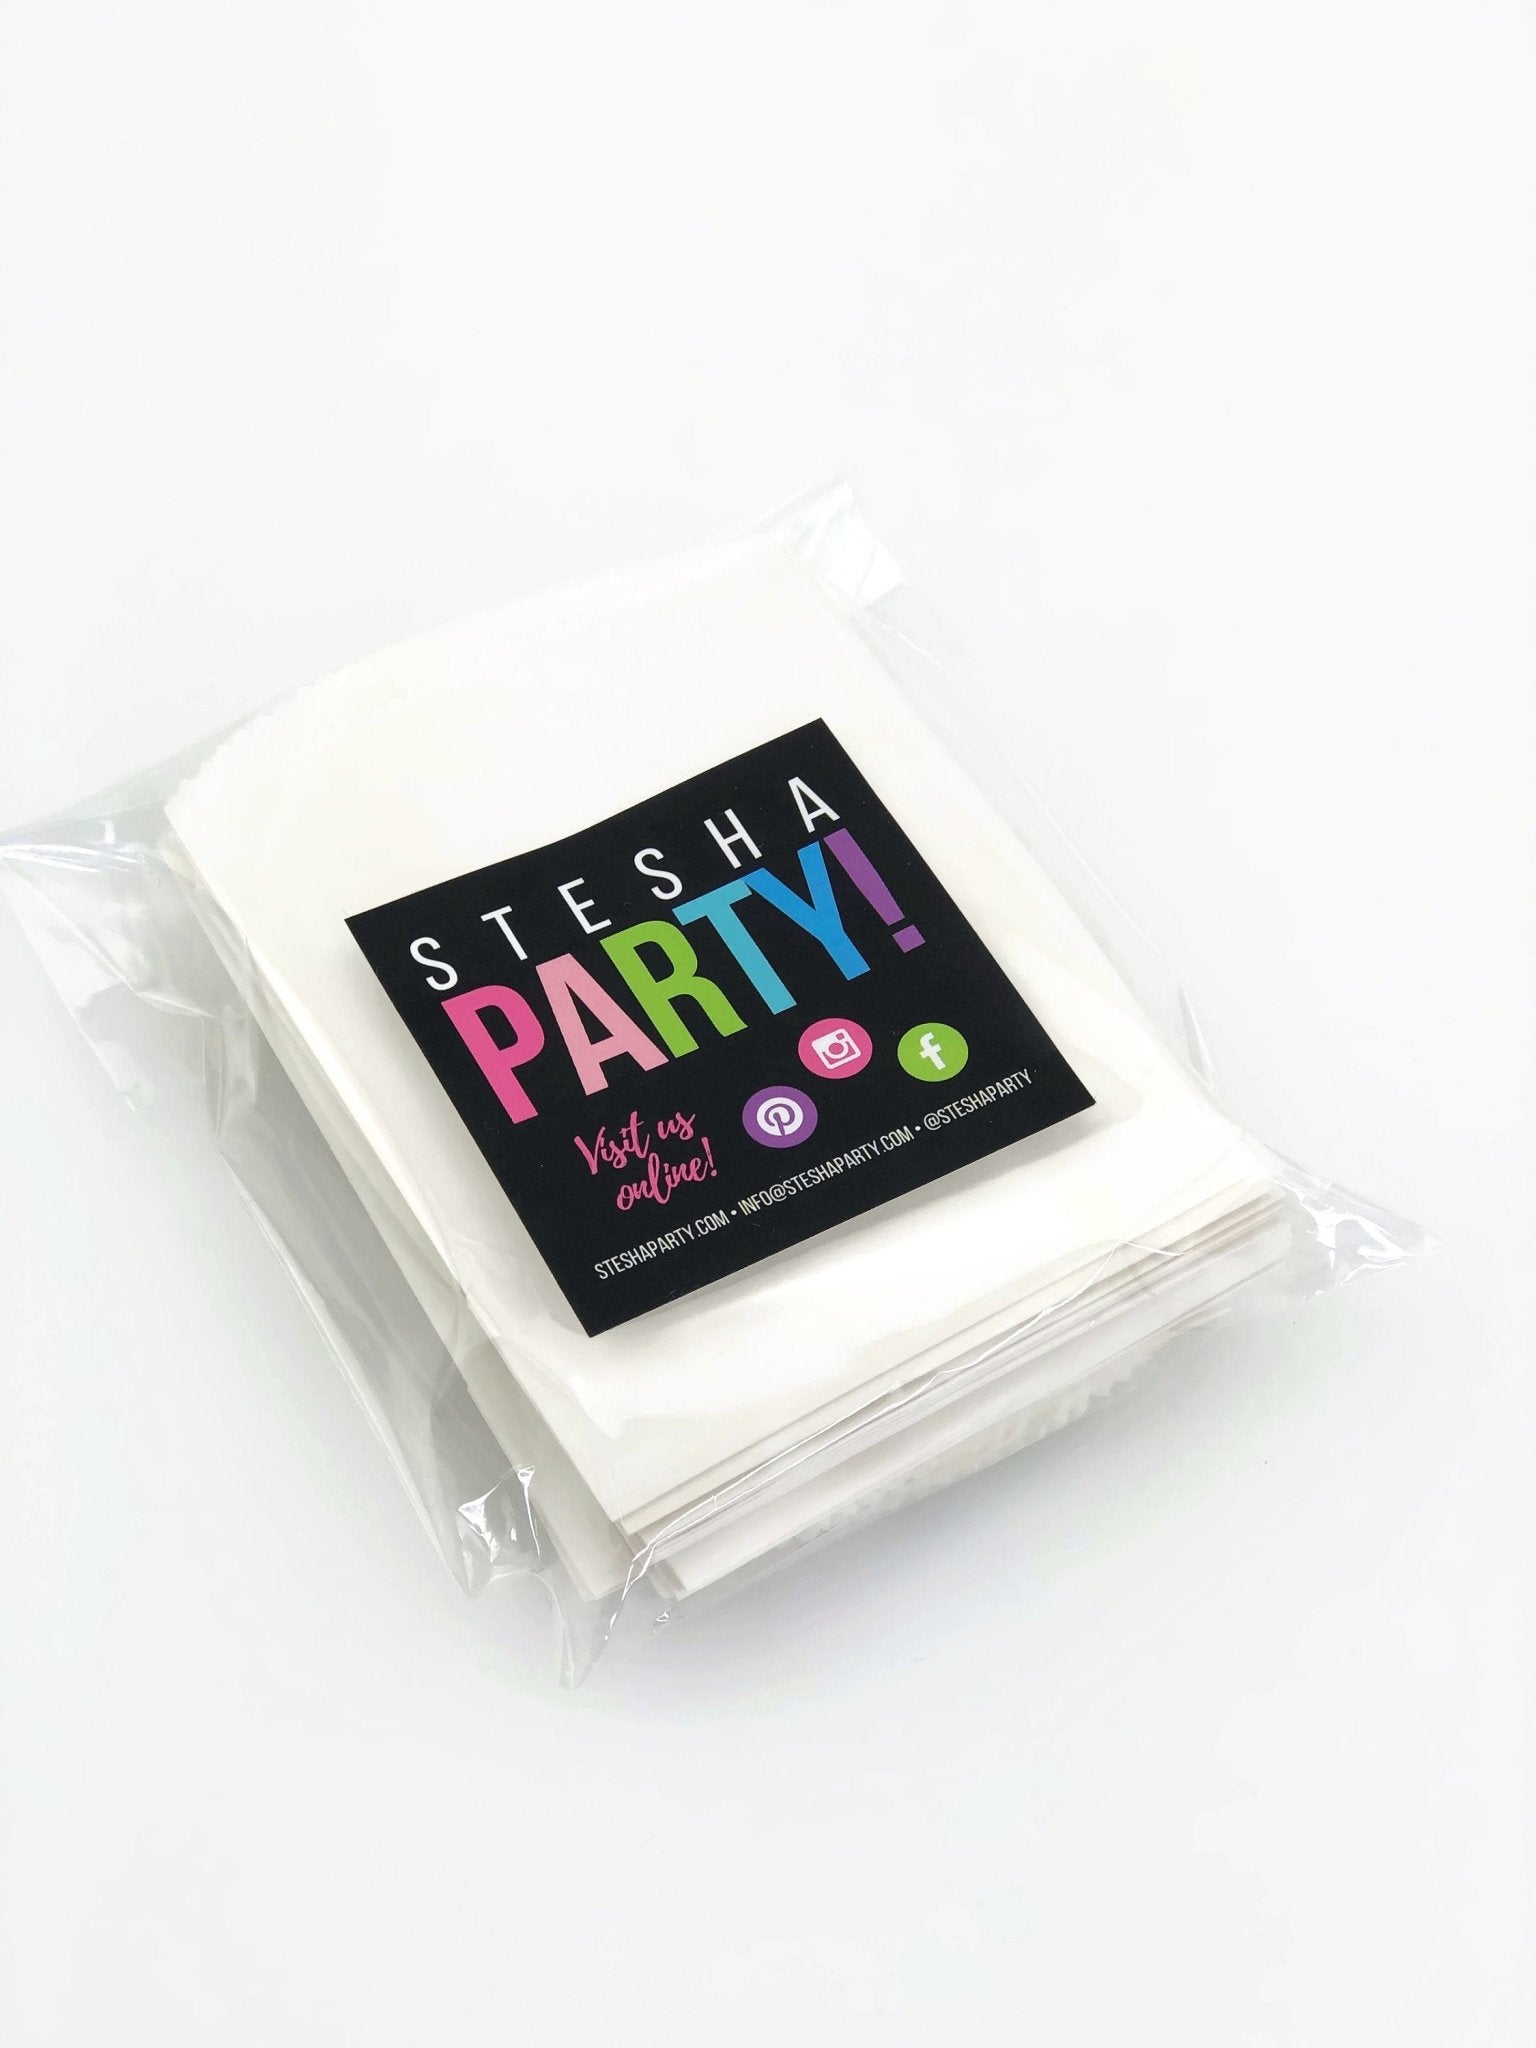 Stesha Party 50 Mini White Paper Bags - 4 x 2.5 Party Favor Bags, DIY Craft Supplies